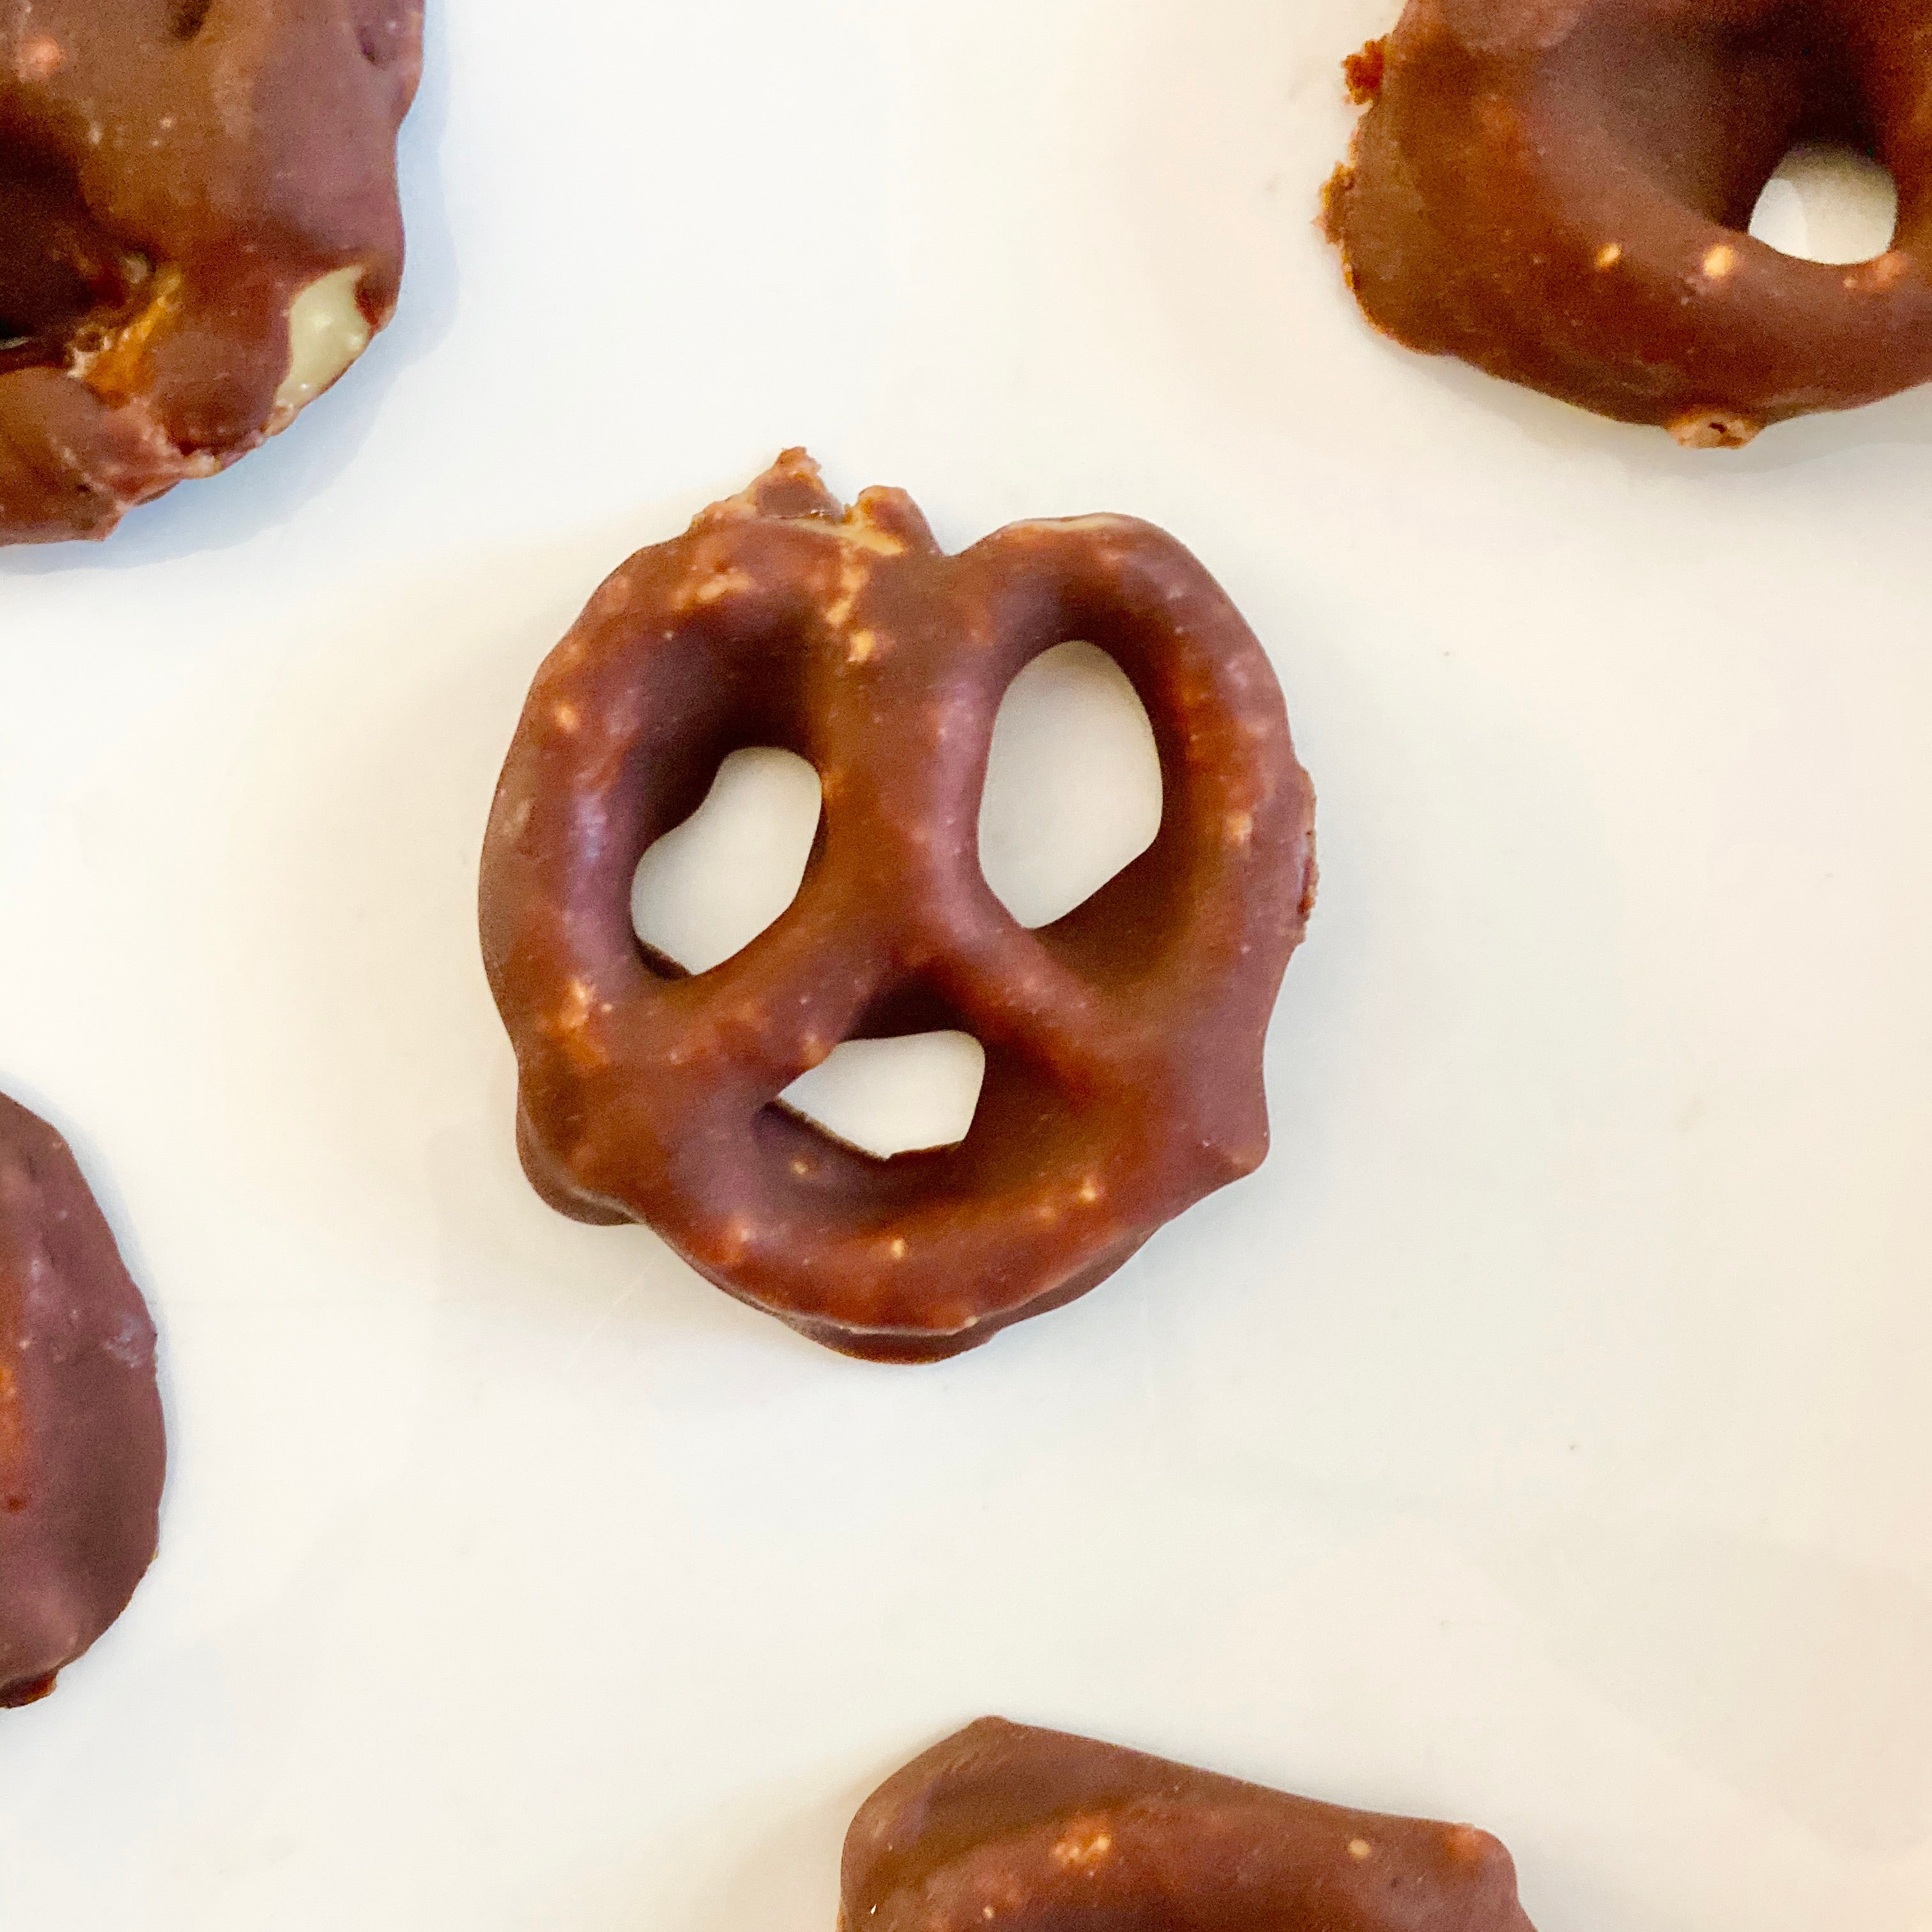 Pretzels covered in Natural Peanut Butter and chocolate.